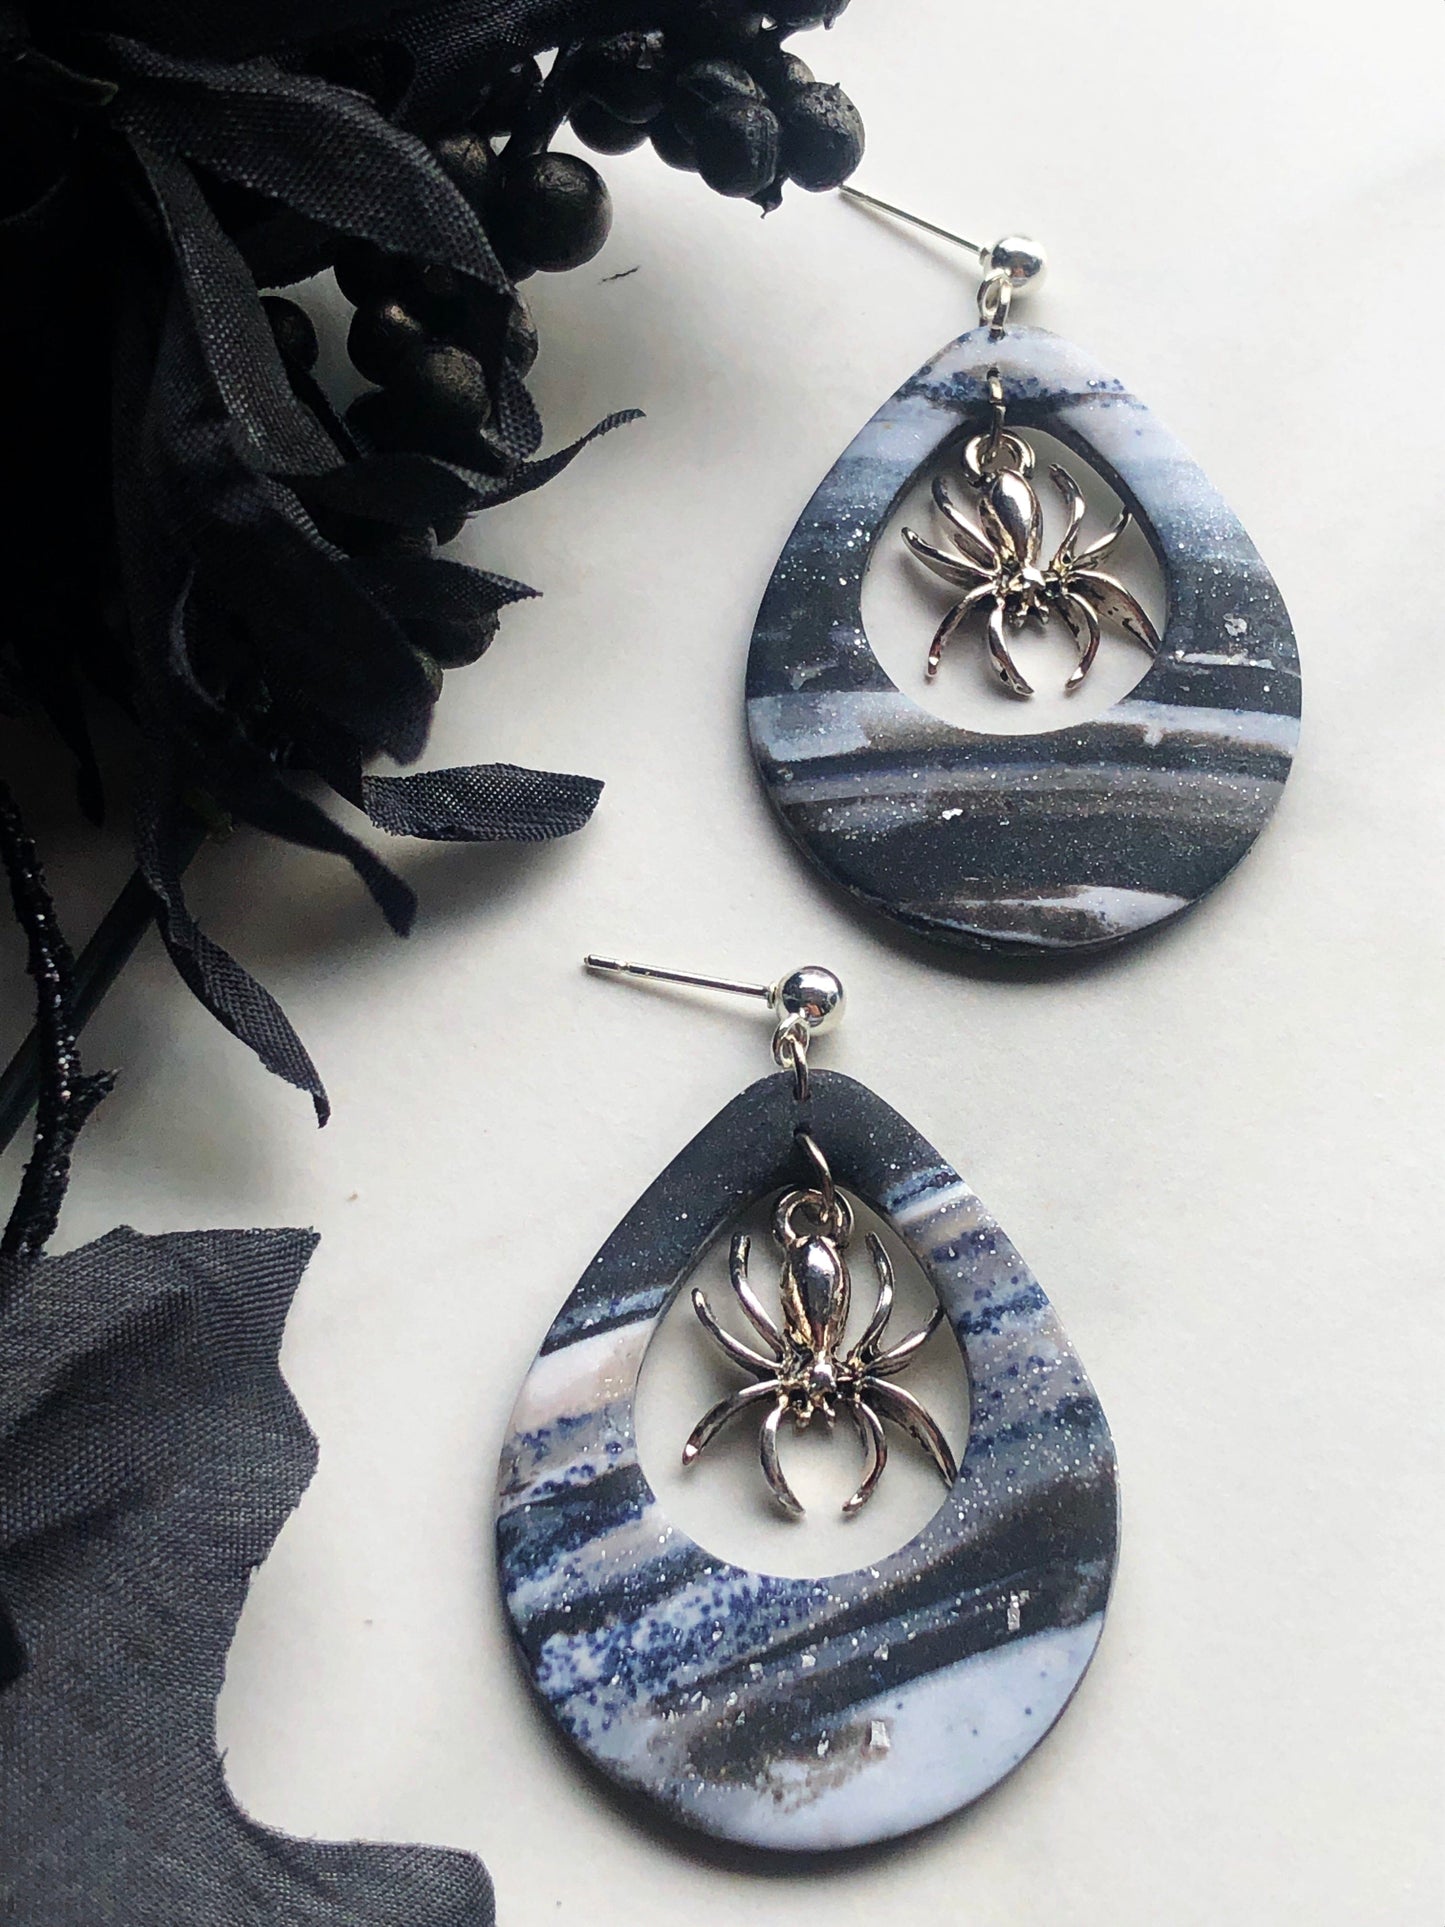 Earrings Arana - Marbled Grey/White Clay Teardrops with Spider Charm